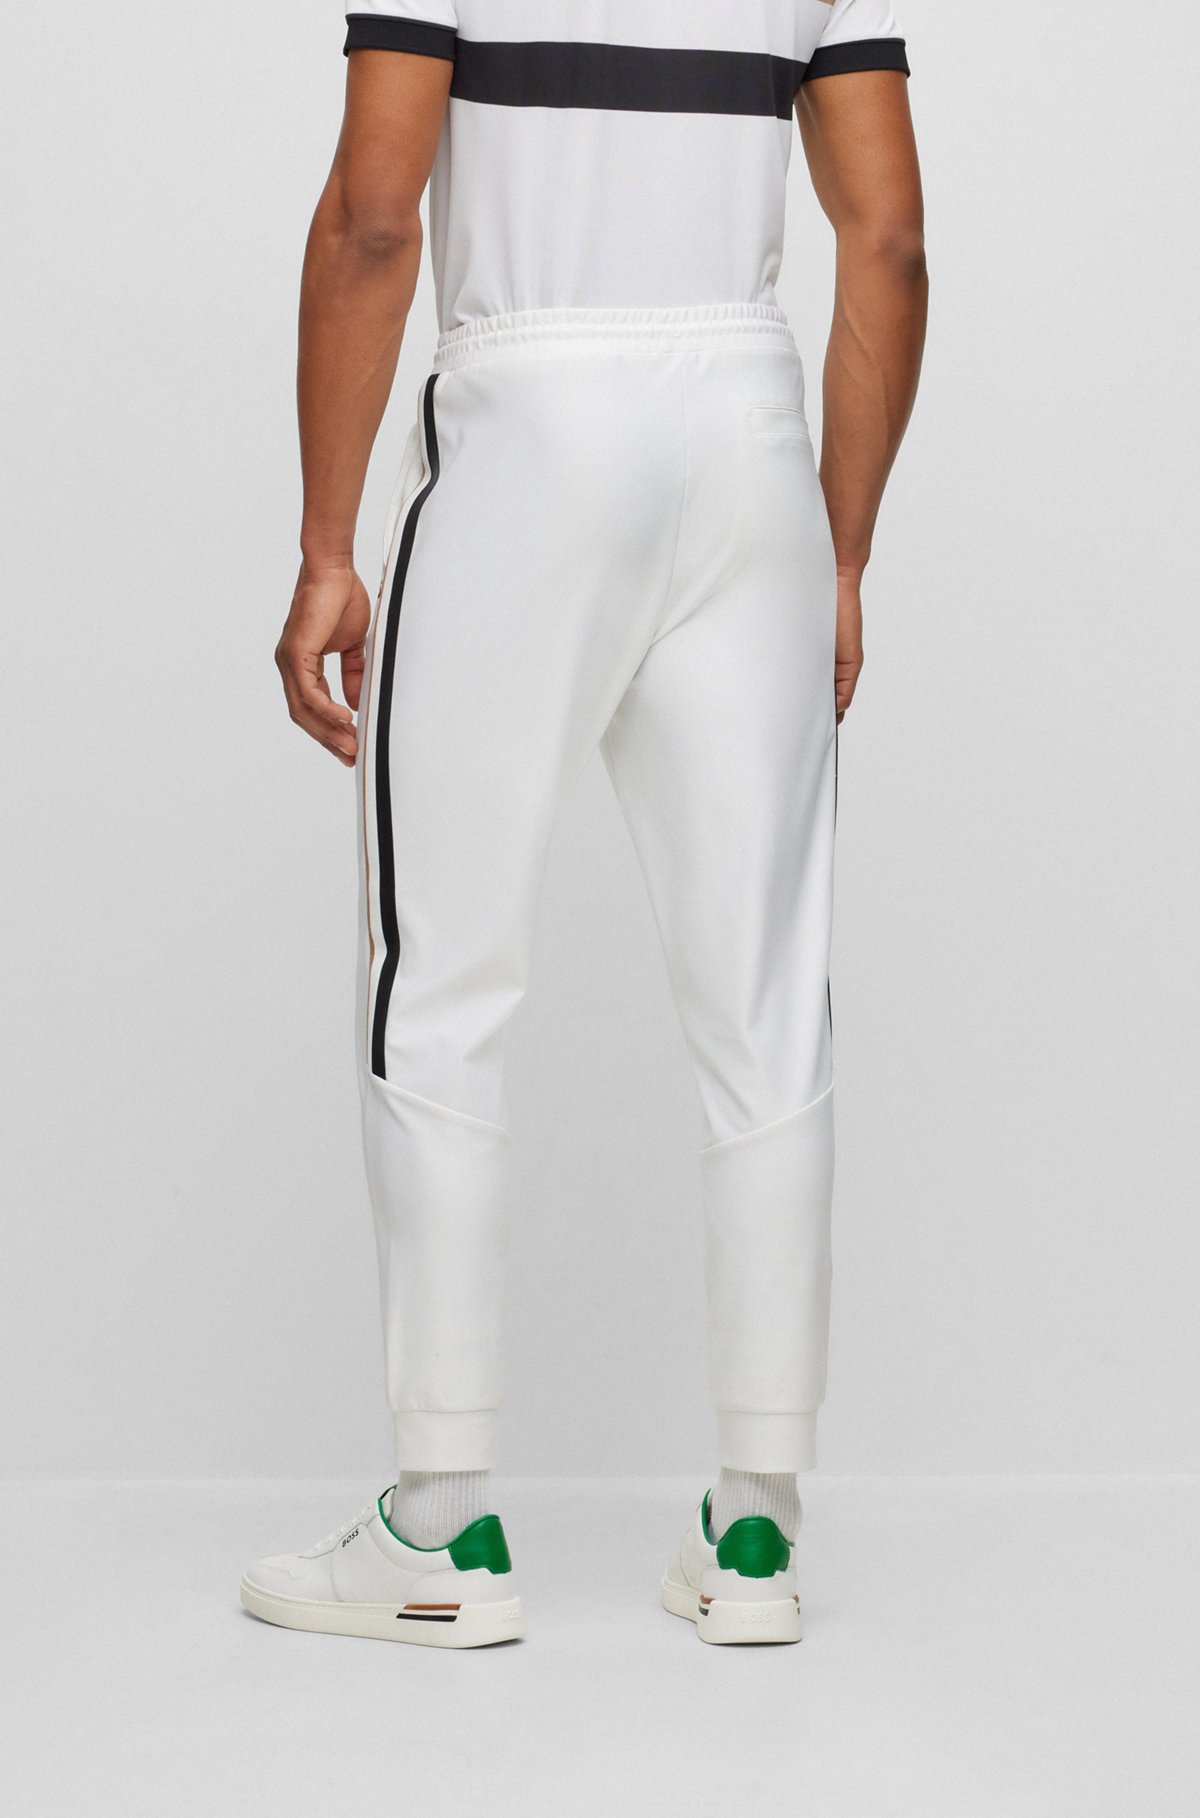 BOSS x Matteo Berrettini tracksuit bottoms with stripes and logo, White